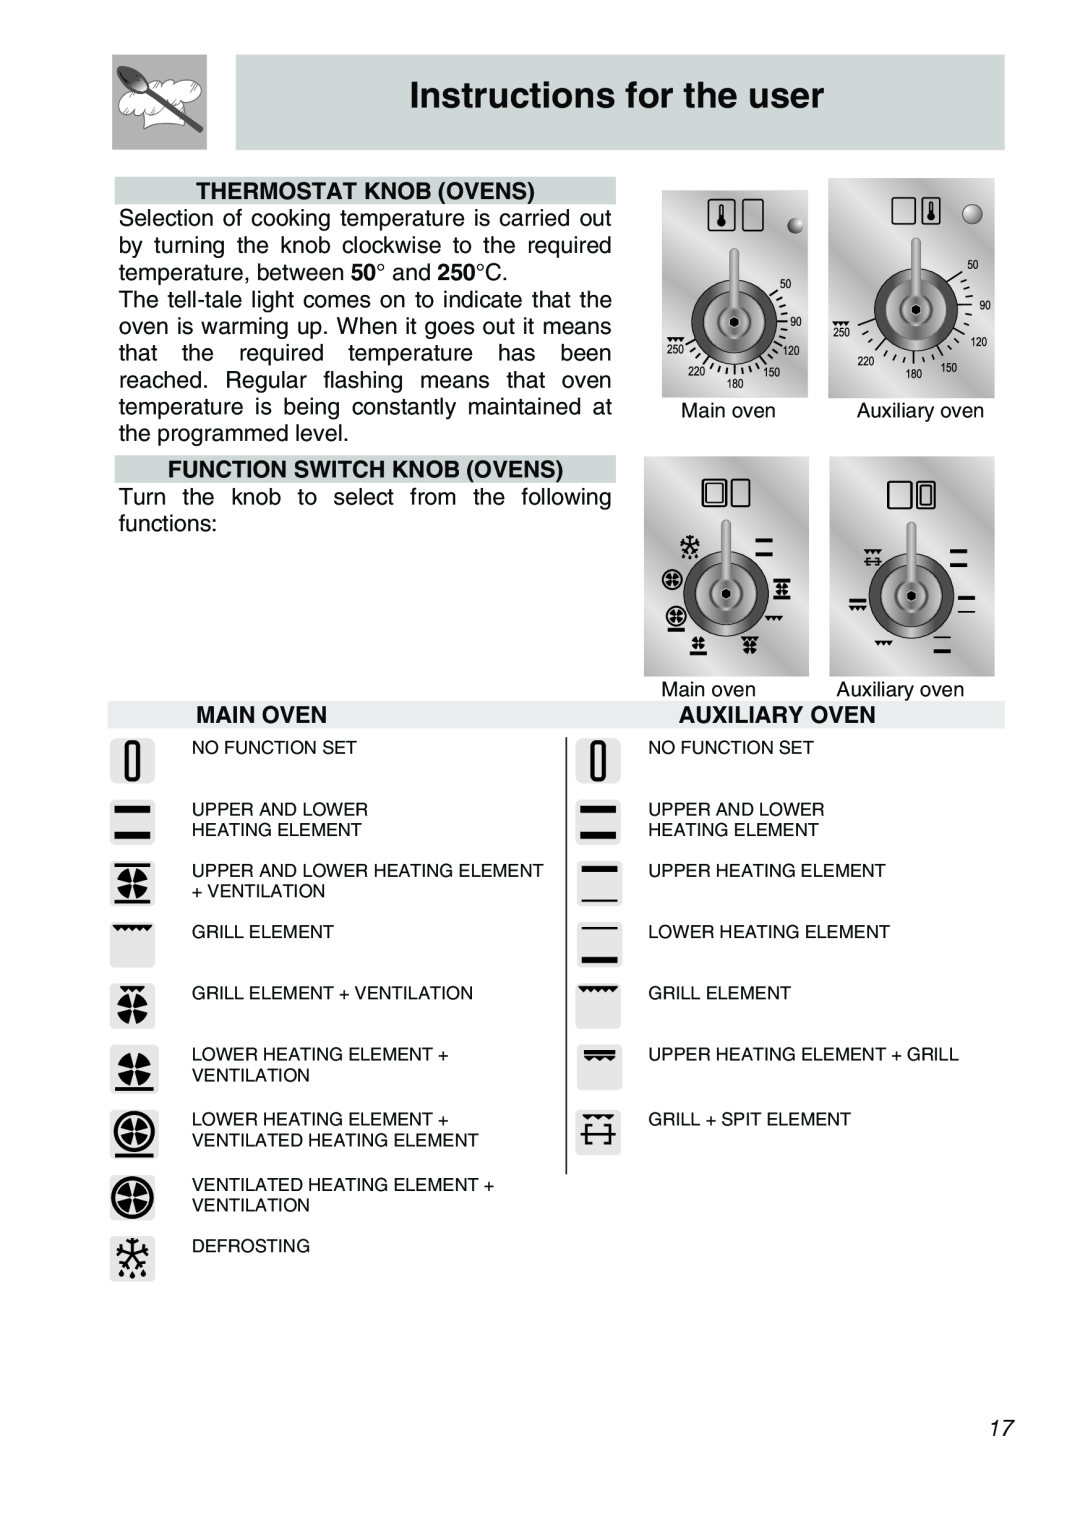 Smeg A21X-5 manual Instructions for the user, Thermostat Knob Ovens, Function Switch Knob Ovens, Main Oven, Auxiliary Oven 